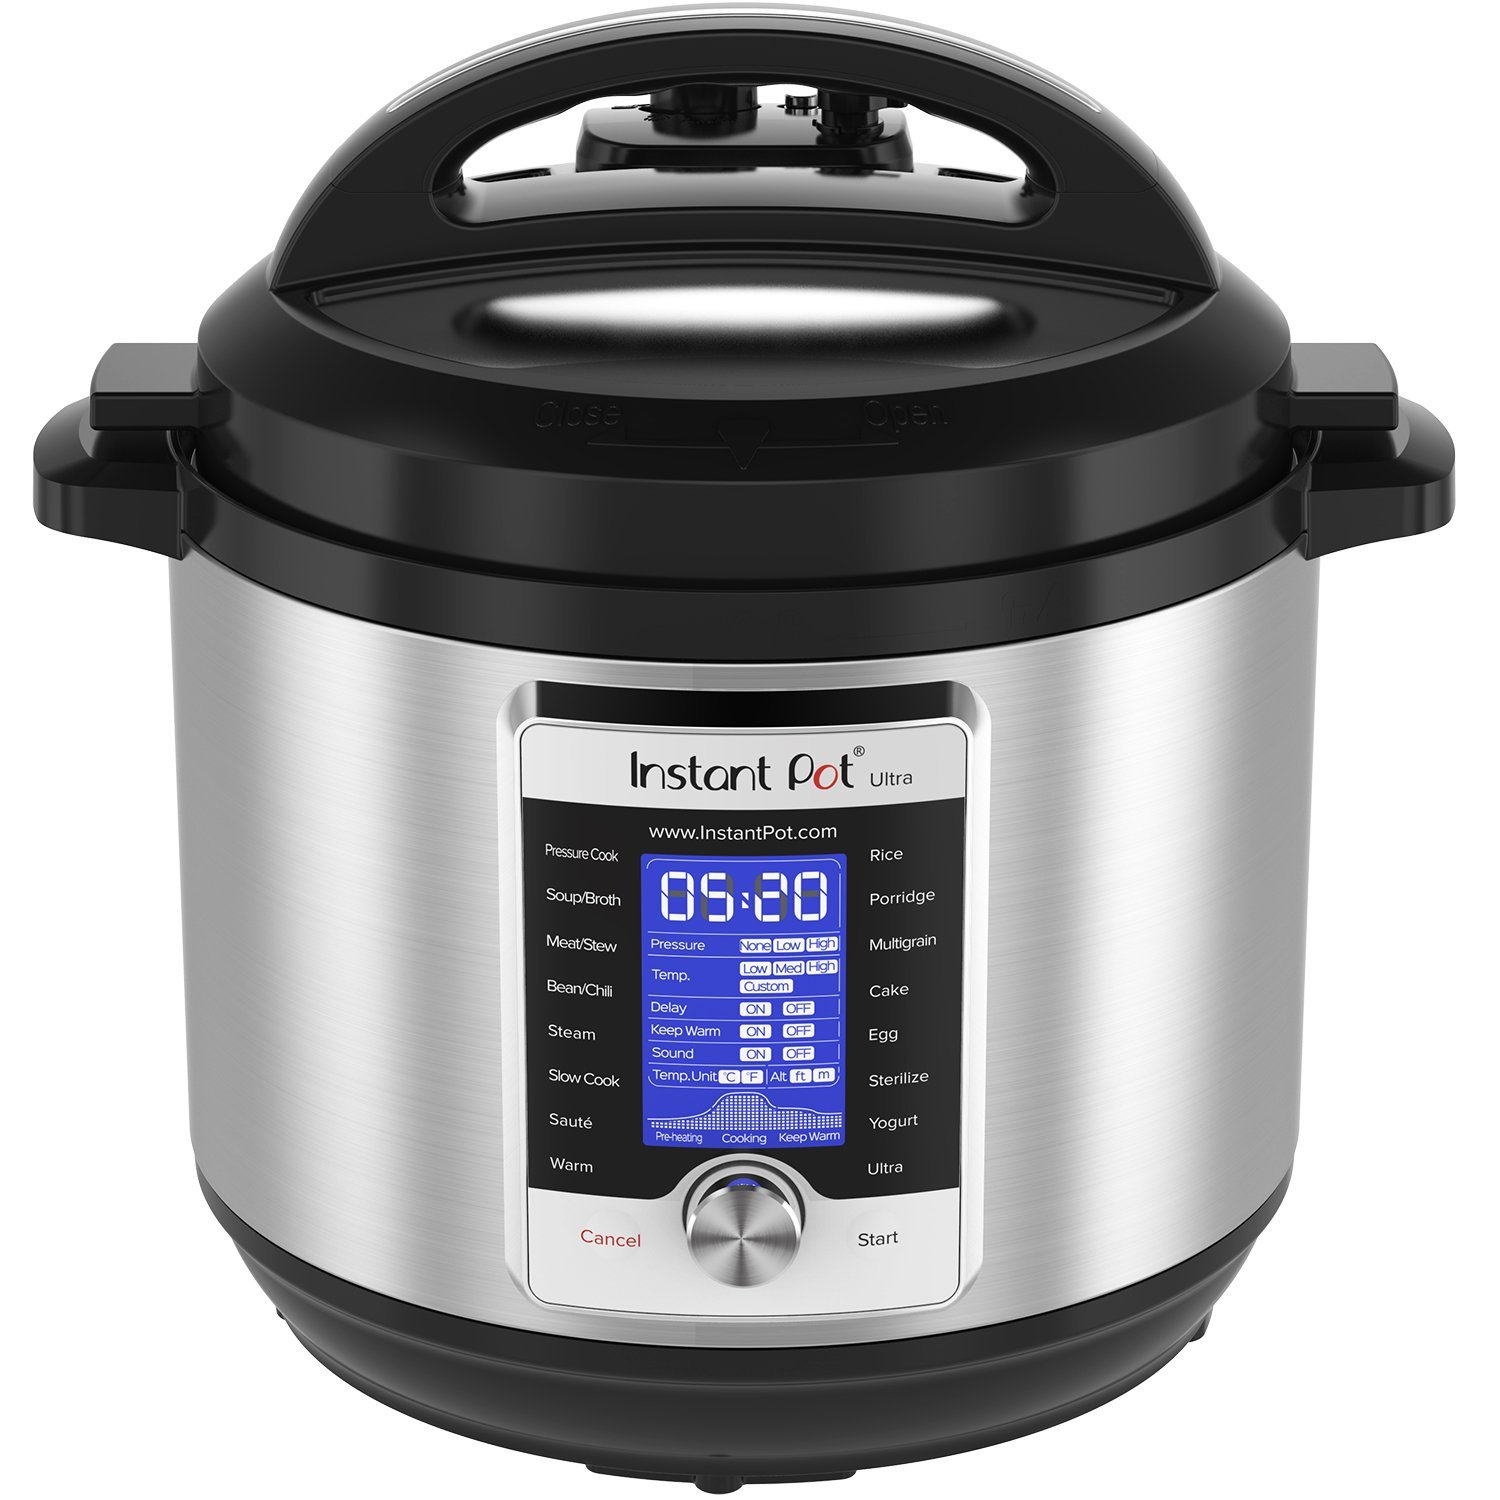 Instant Pot Ultra 8-qt 10-in-1 multi-use programmable pressure cooker for $100